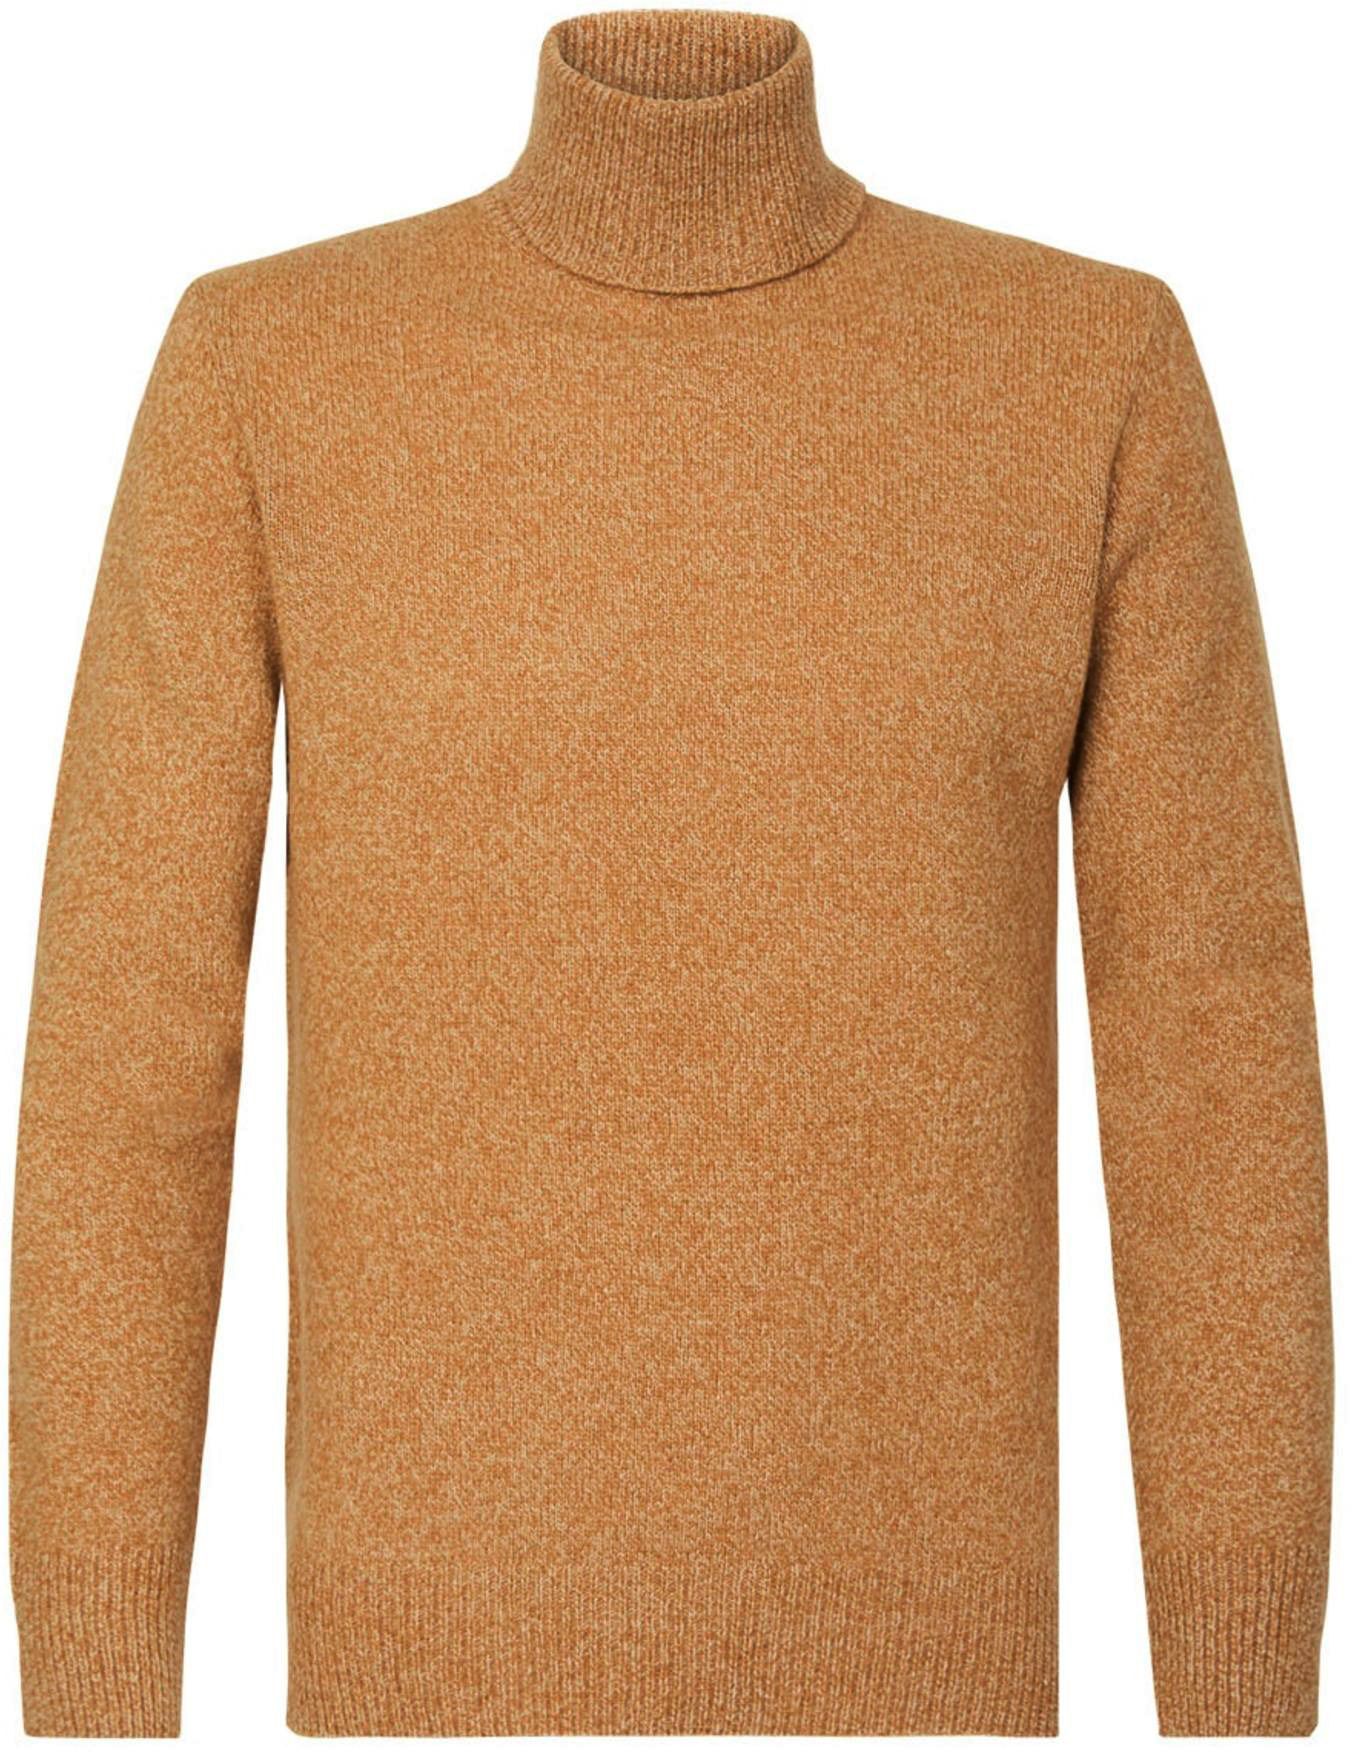 Profuomo Turtleneck Heavy Knitted Camel Brown size L